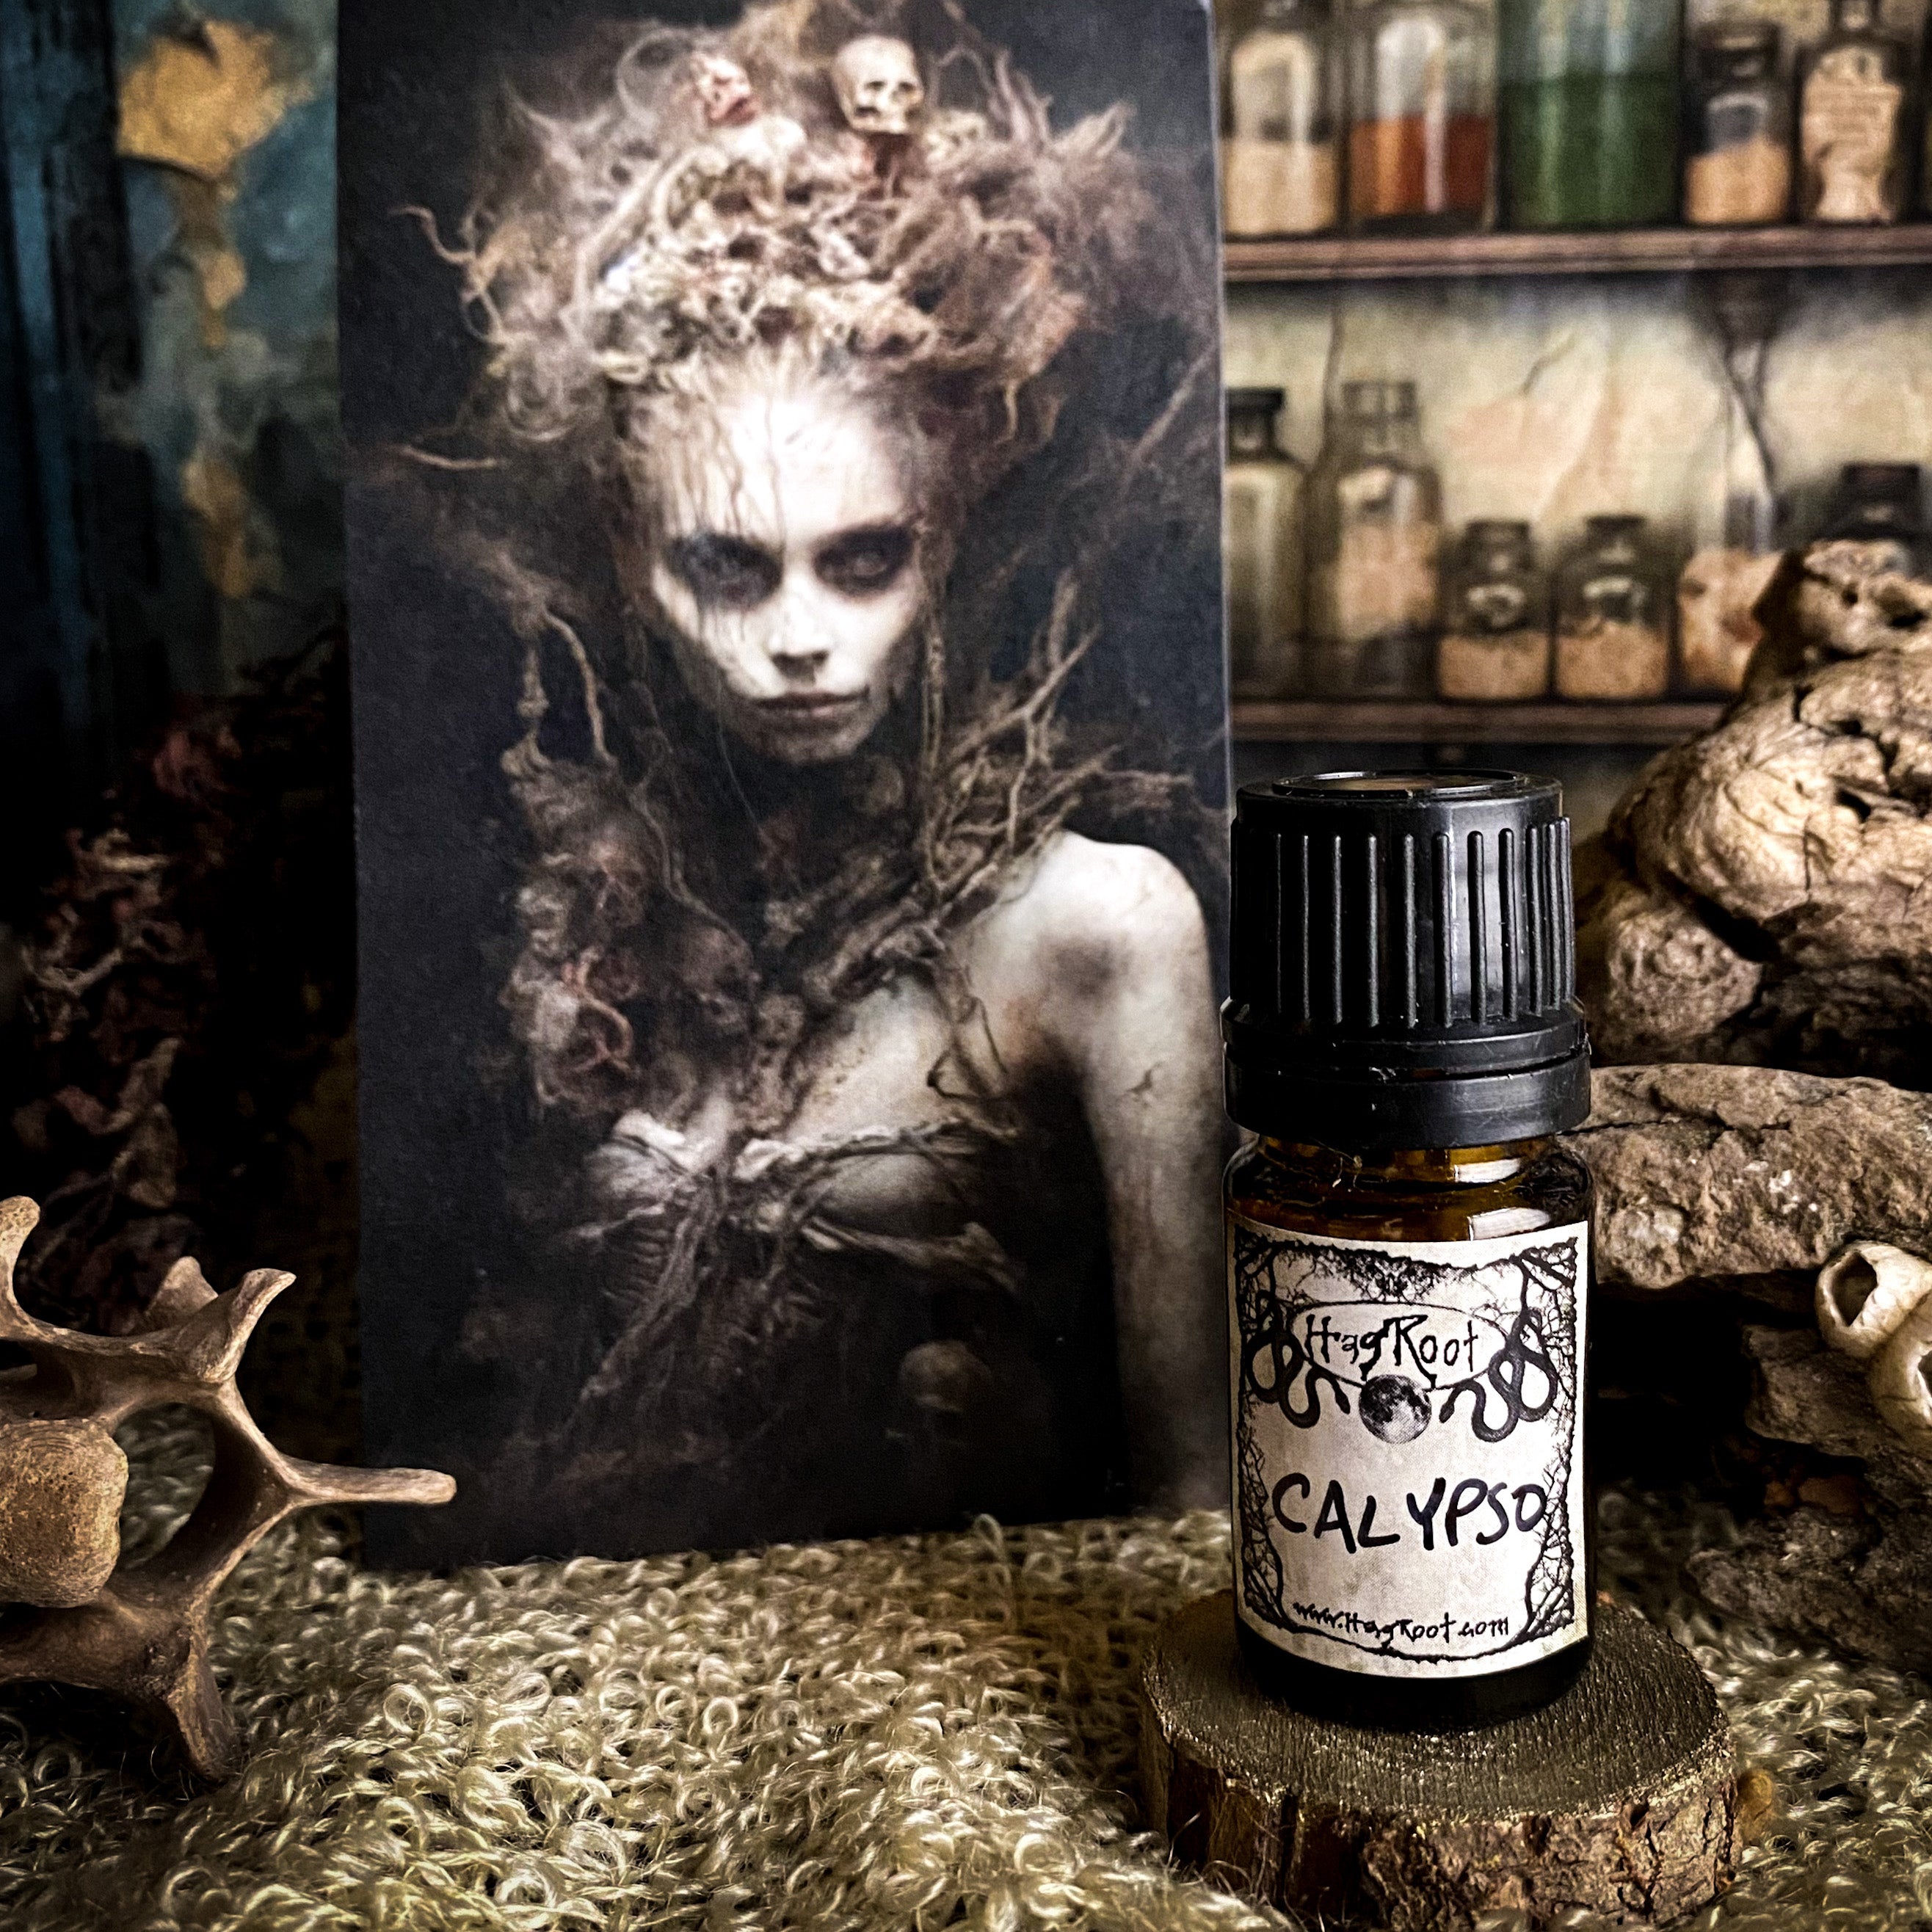 CALYPSO-(Water Lily, Sea Salt, Moss, Cedar, Exotic Spices)-Perfume, Cologne, Anointing, Ritual Oil